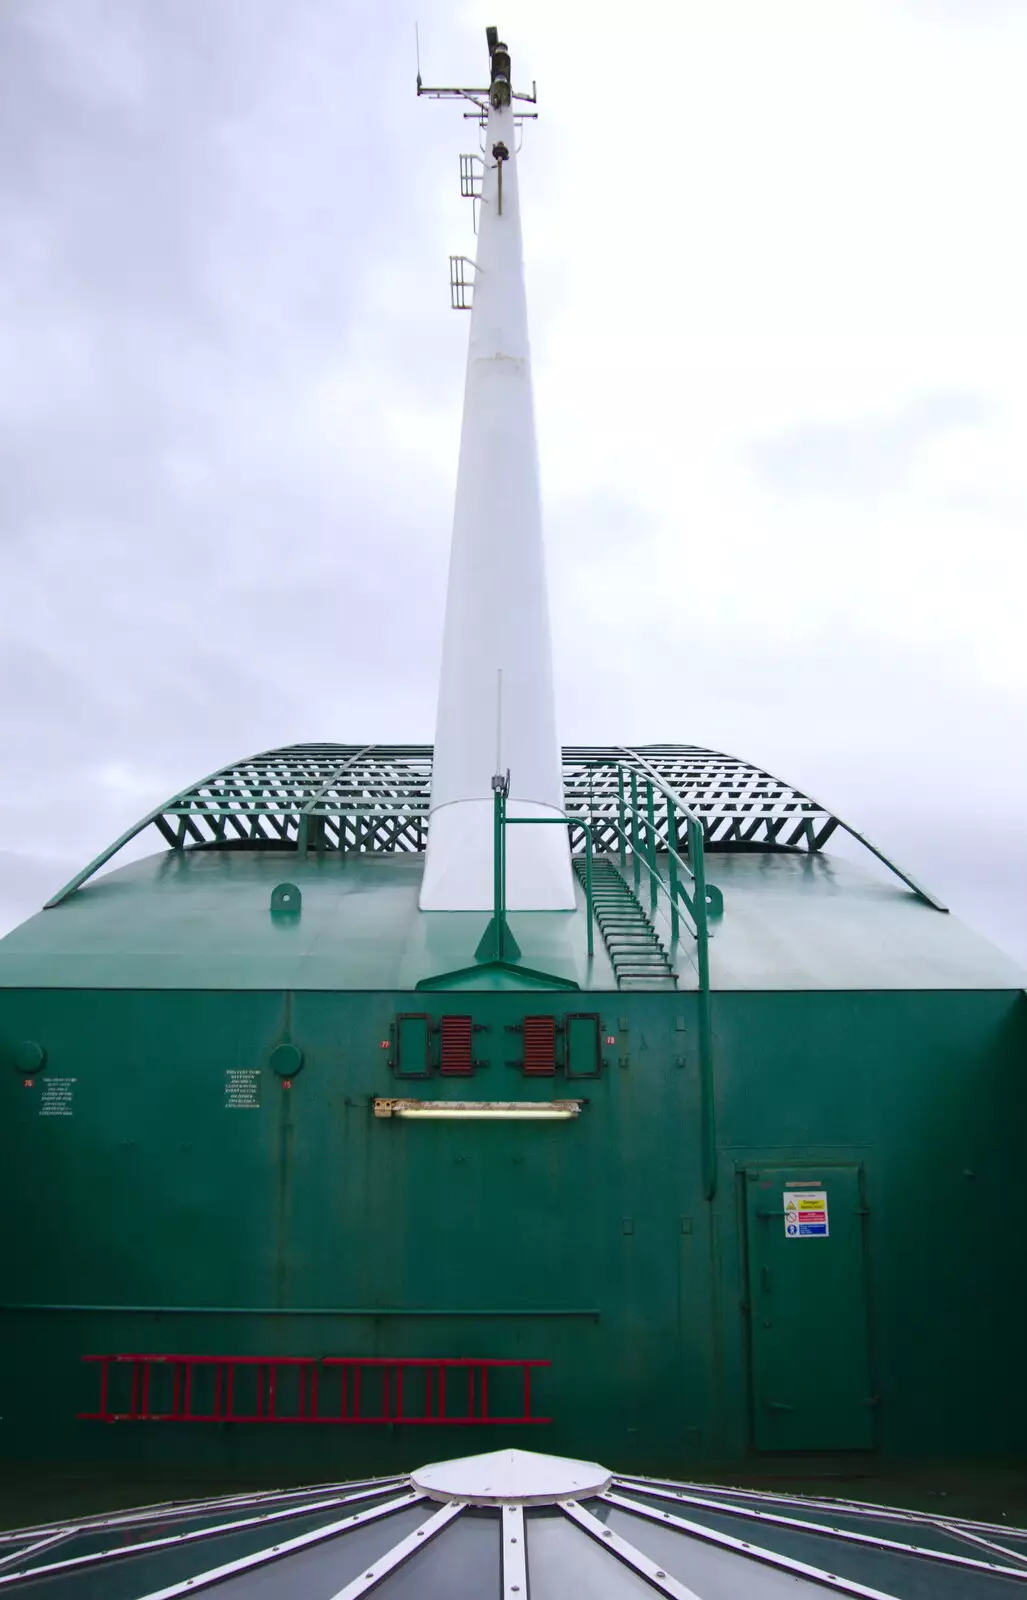 The ferry's token mast, from The Summer Trip to Ireland, Monkstown, Co. Dublin, Ireland - 9th August 2019